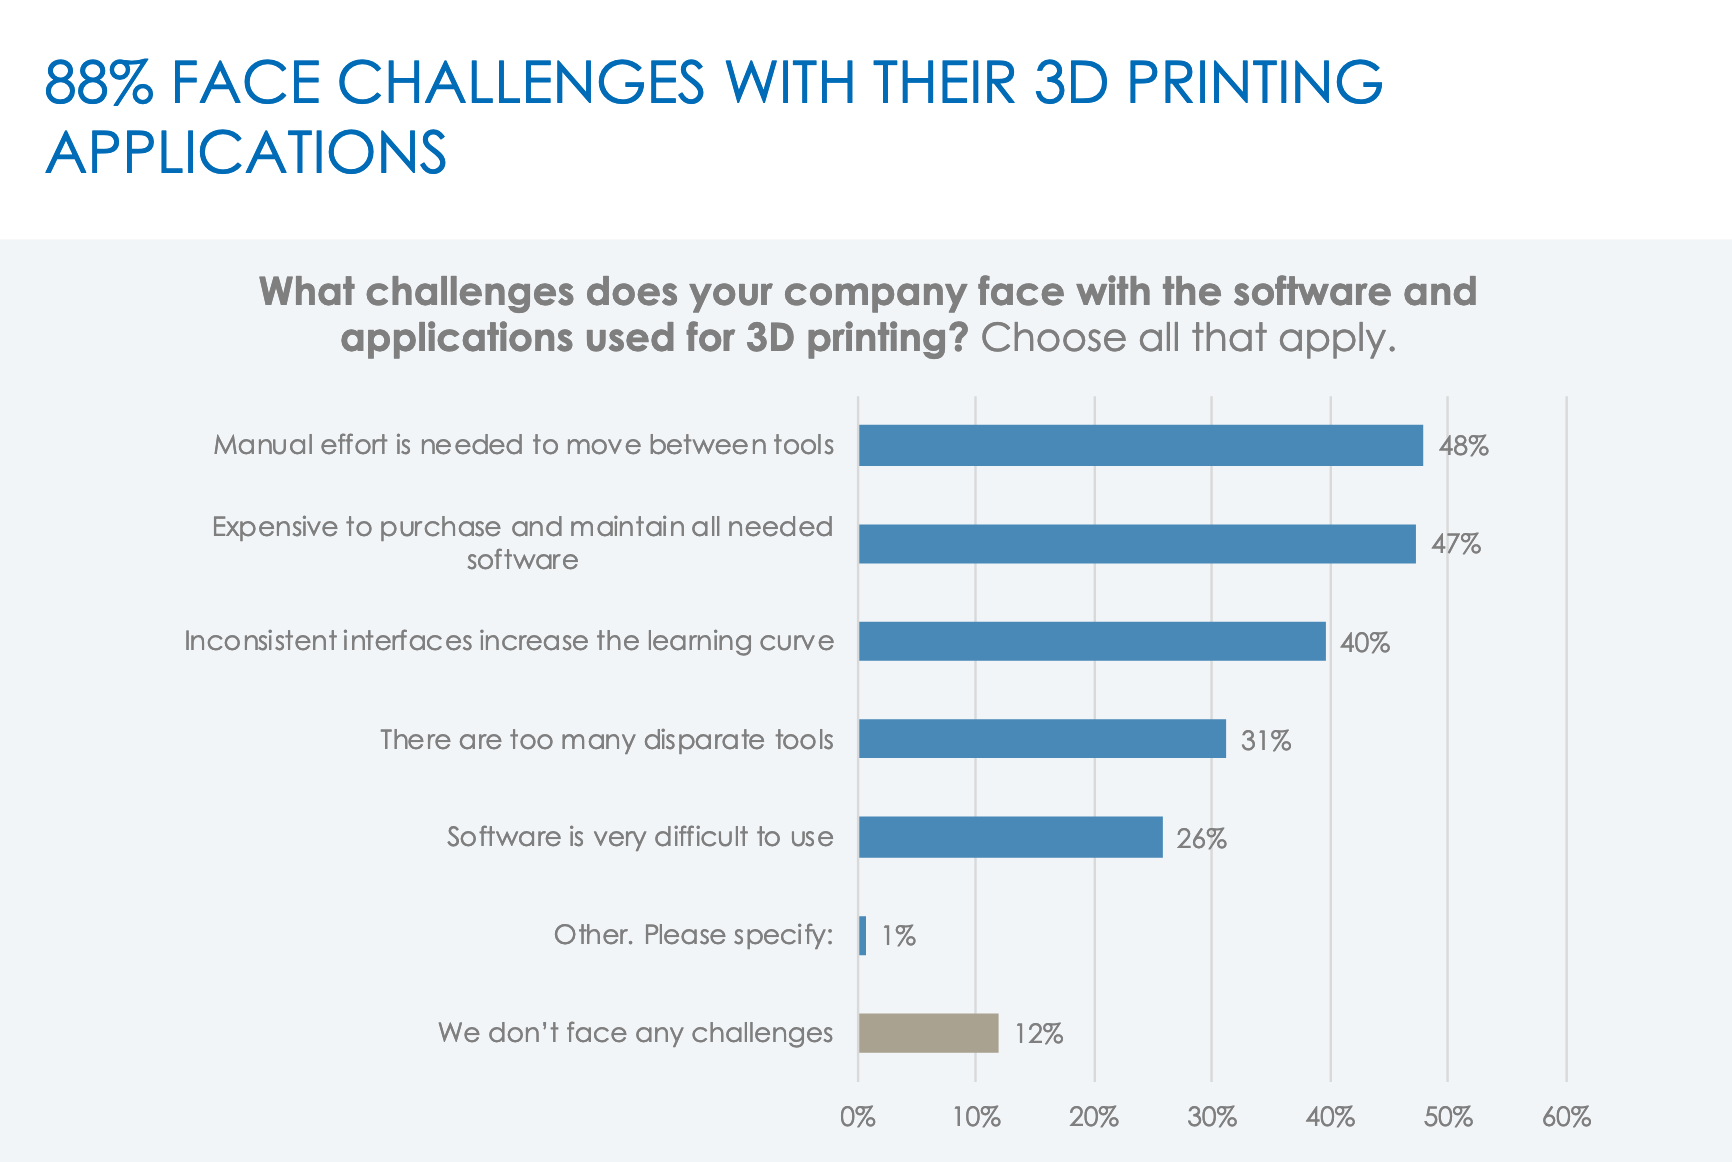 Shapeways survey says 88% of manufacturers face challenges with 3D pritning applicaitons.